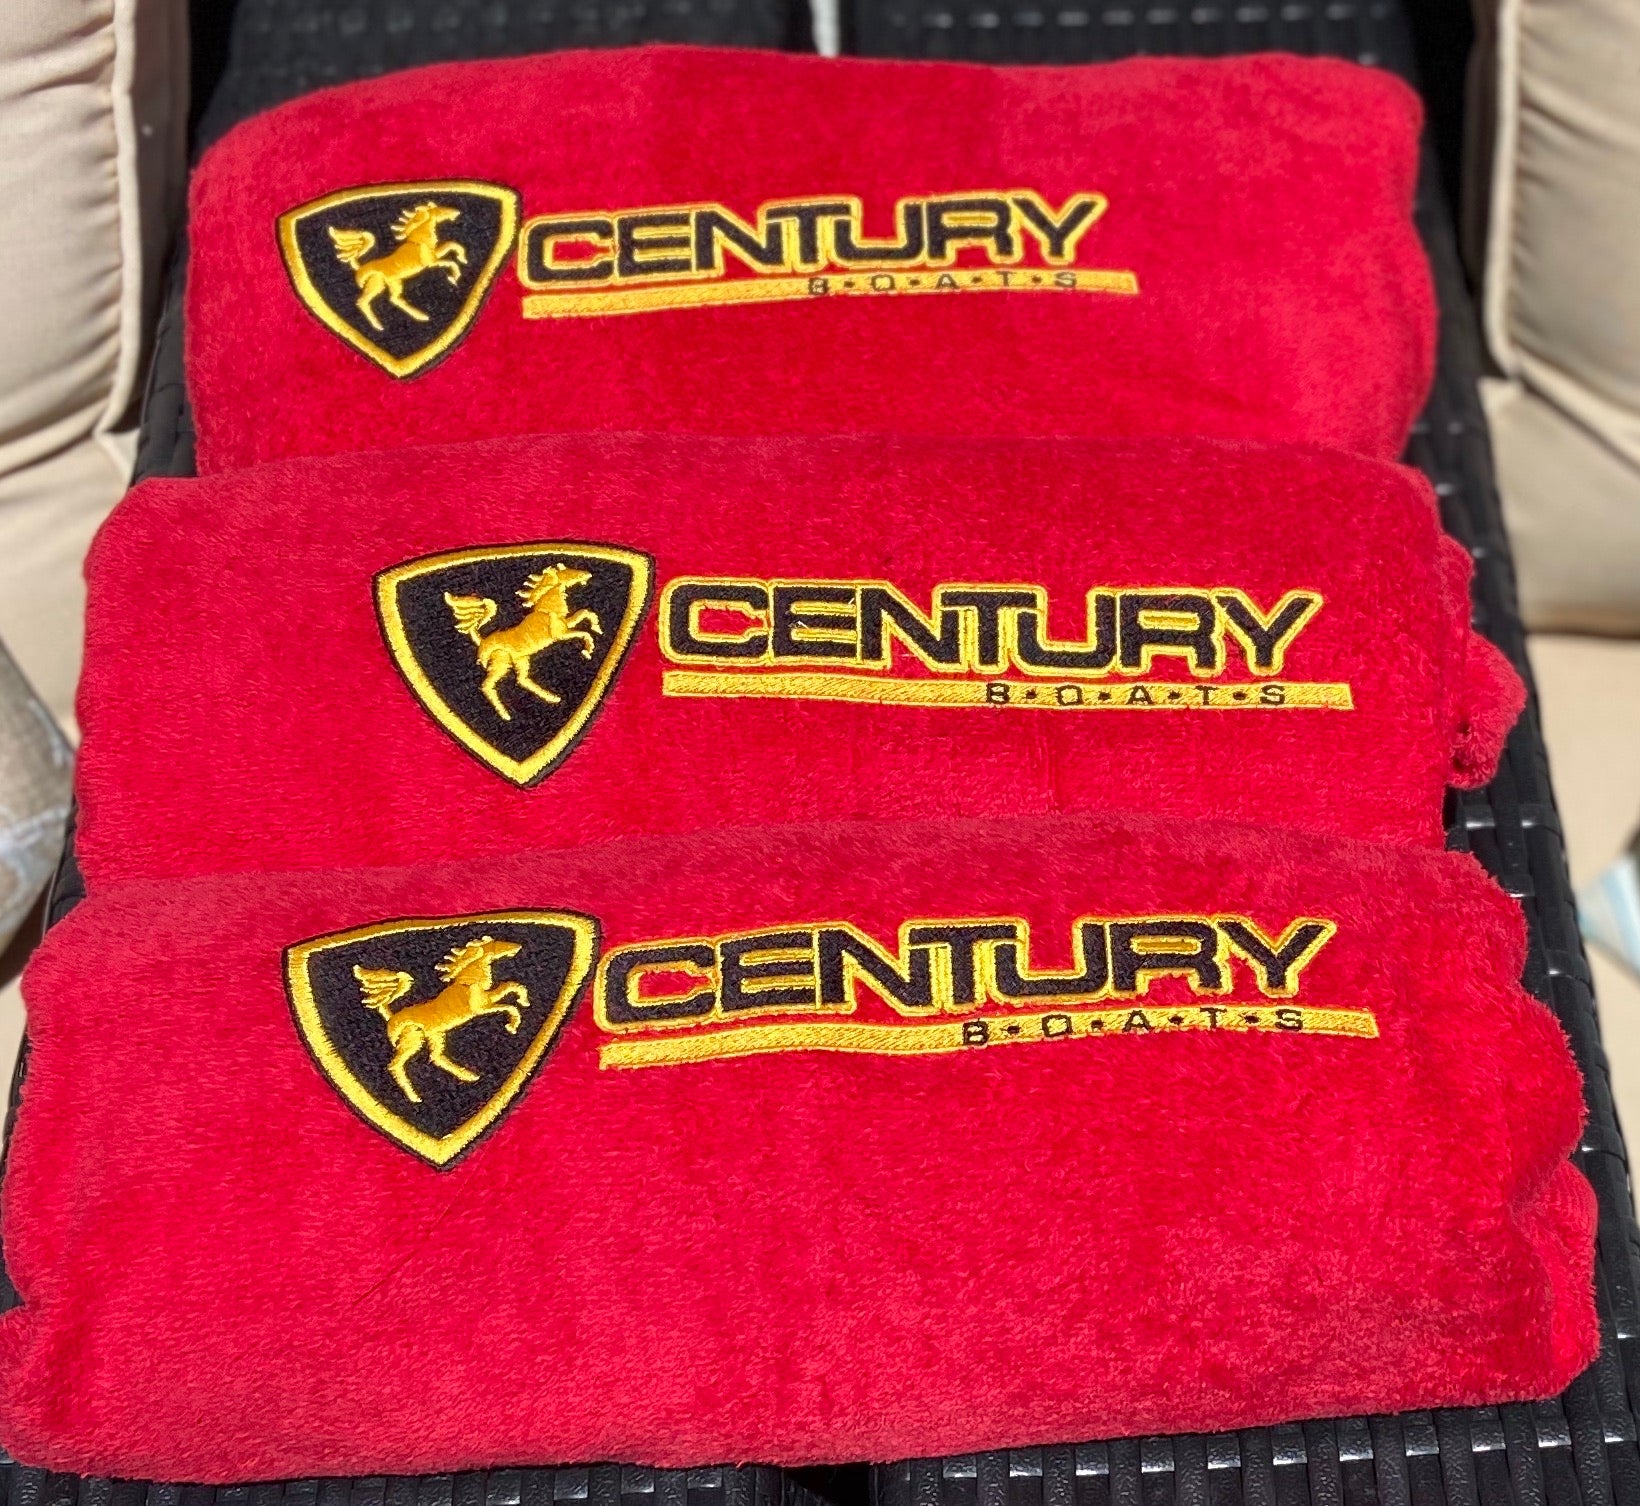 Towel Velour Embroidered with YOUR Name , monogram or logo